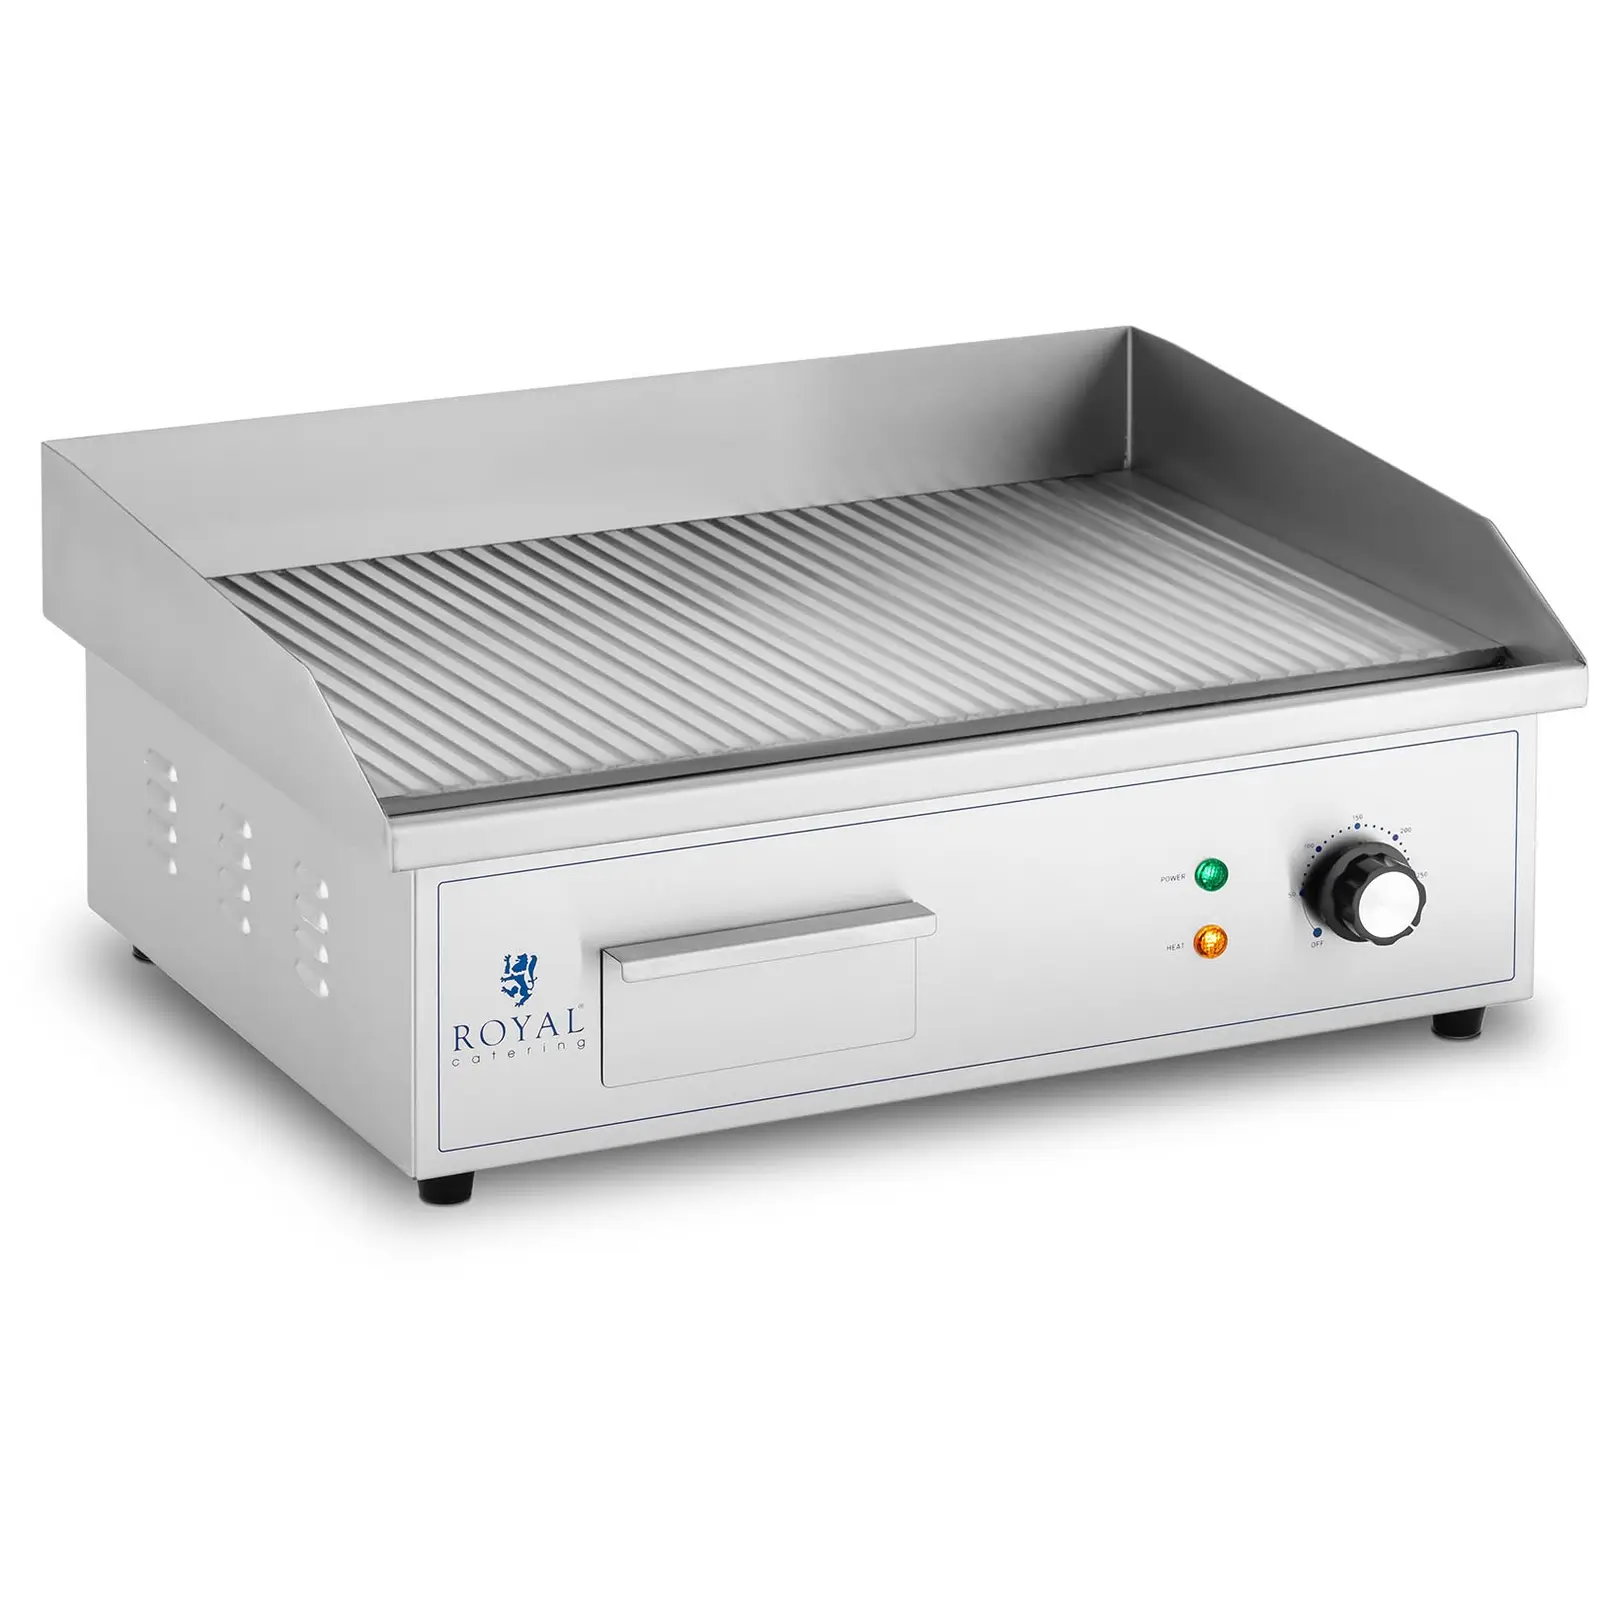 Stegeplade - 550 x 350 mm - Royal Catering - 3,000 W